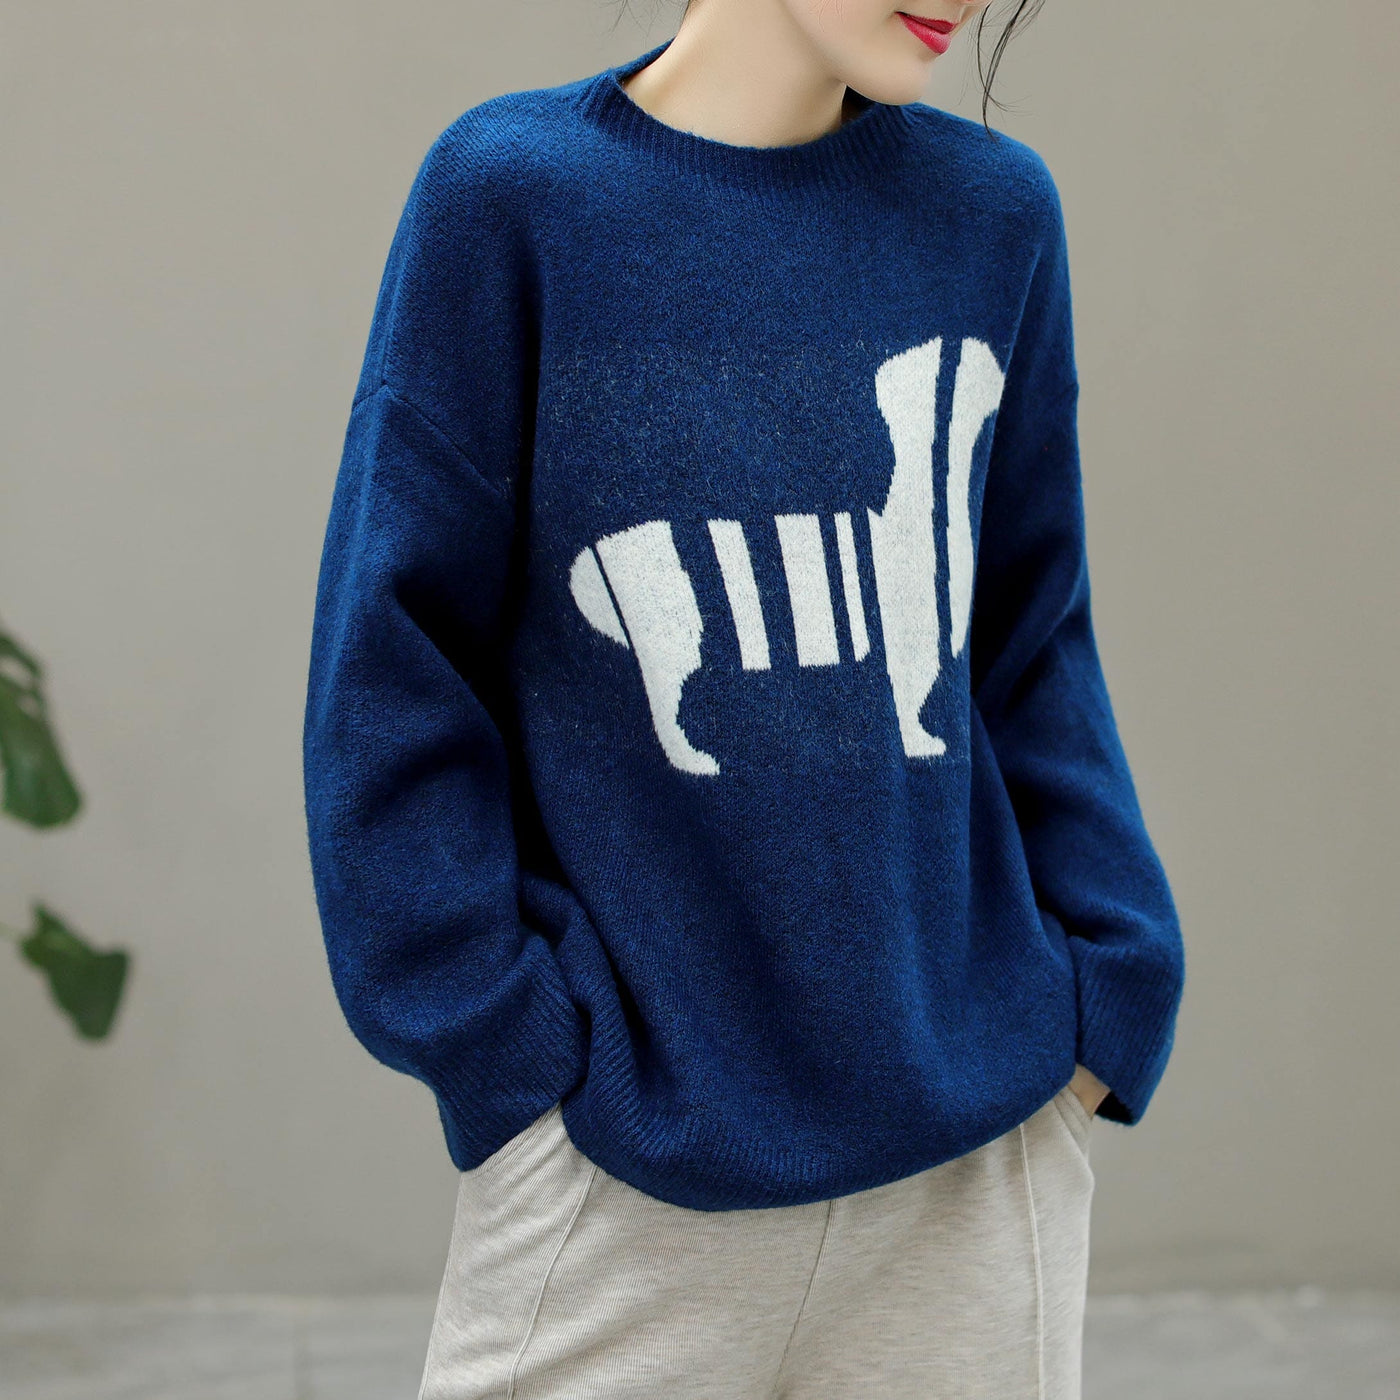 Women Casual Fashion Knitted Winter Sweater Dec 2022 New Arrival One Size Blue 